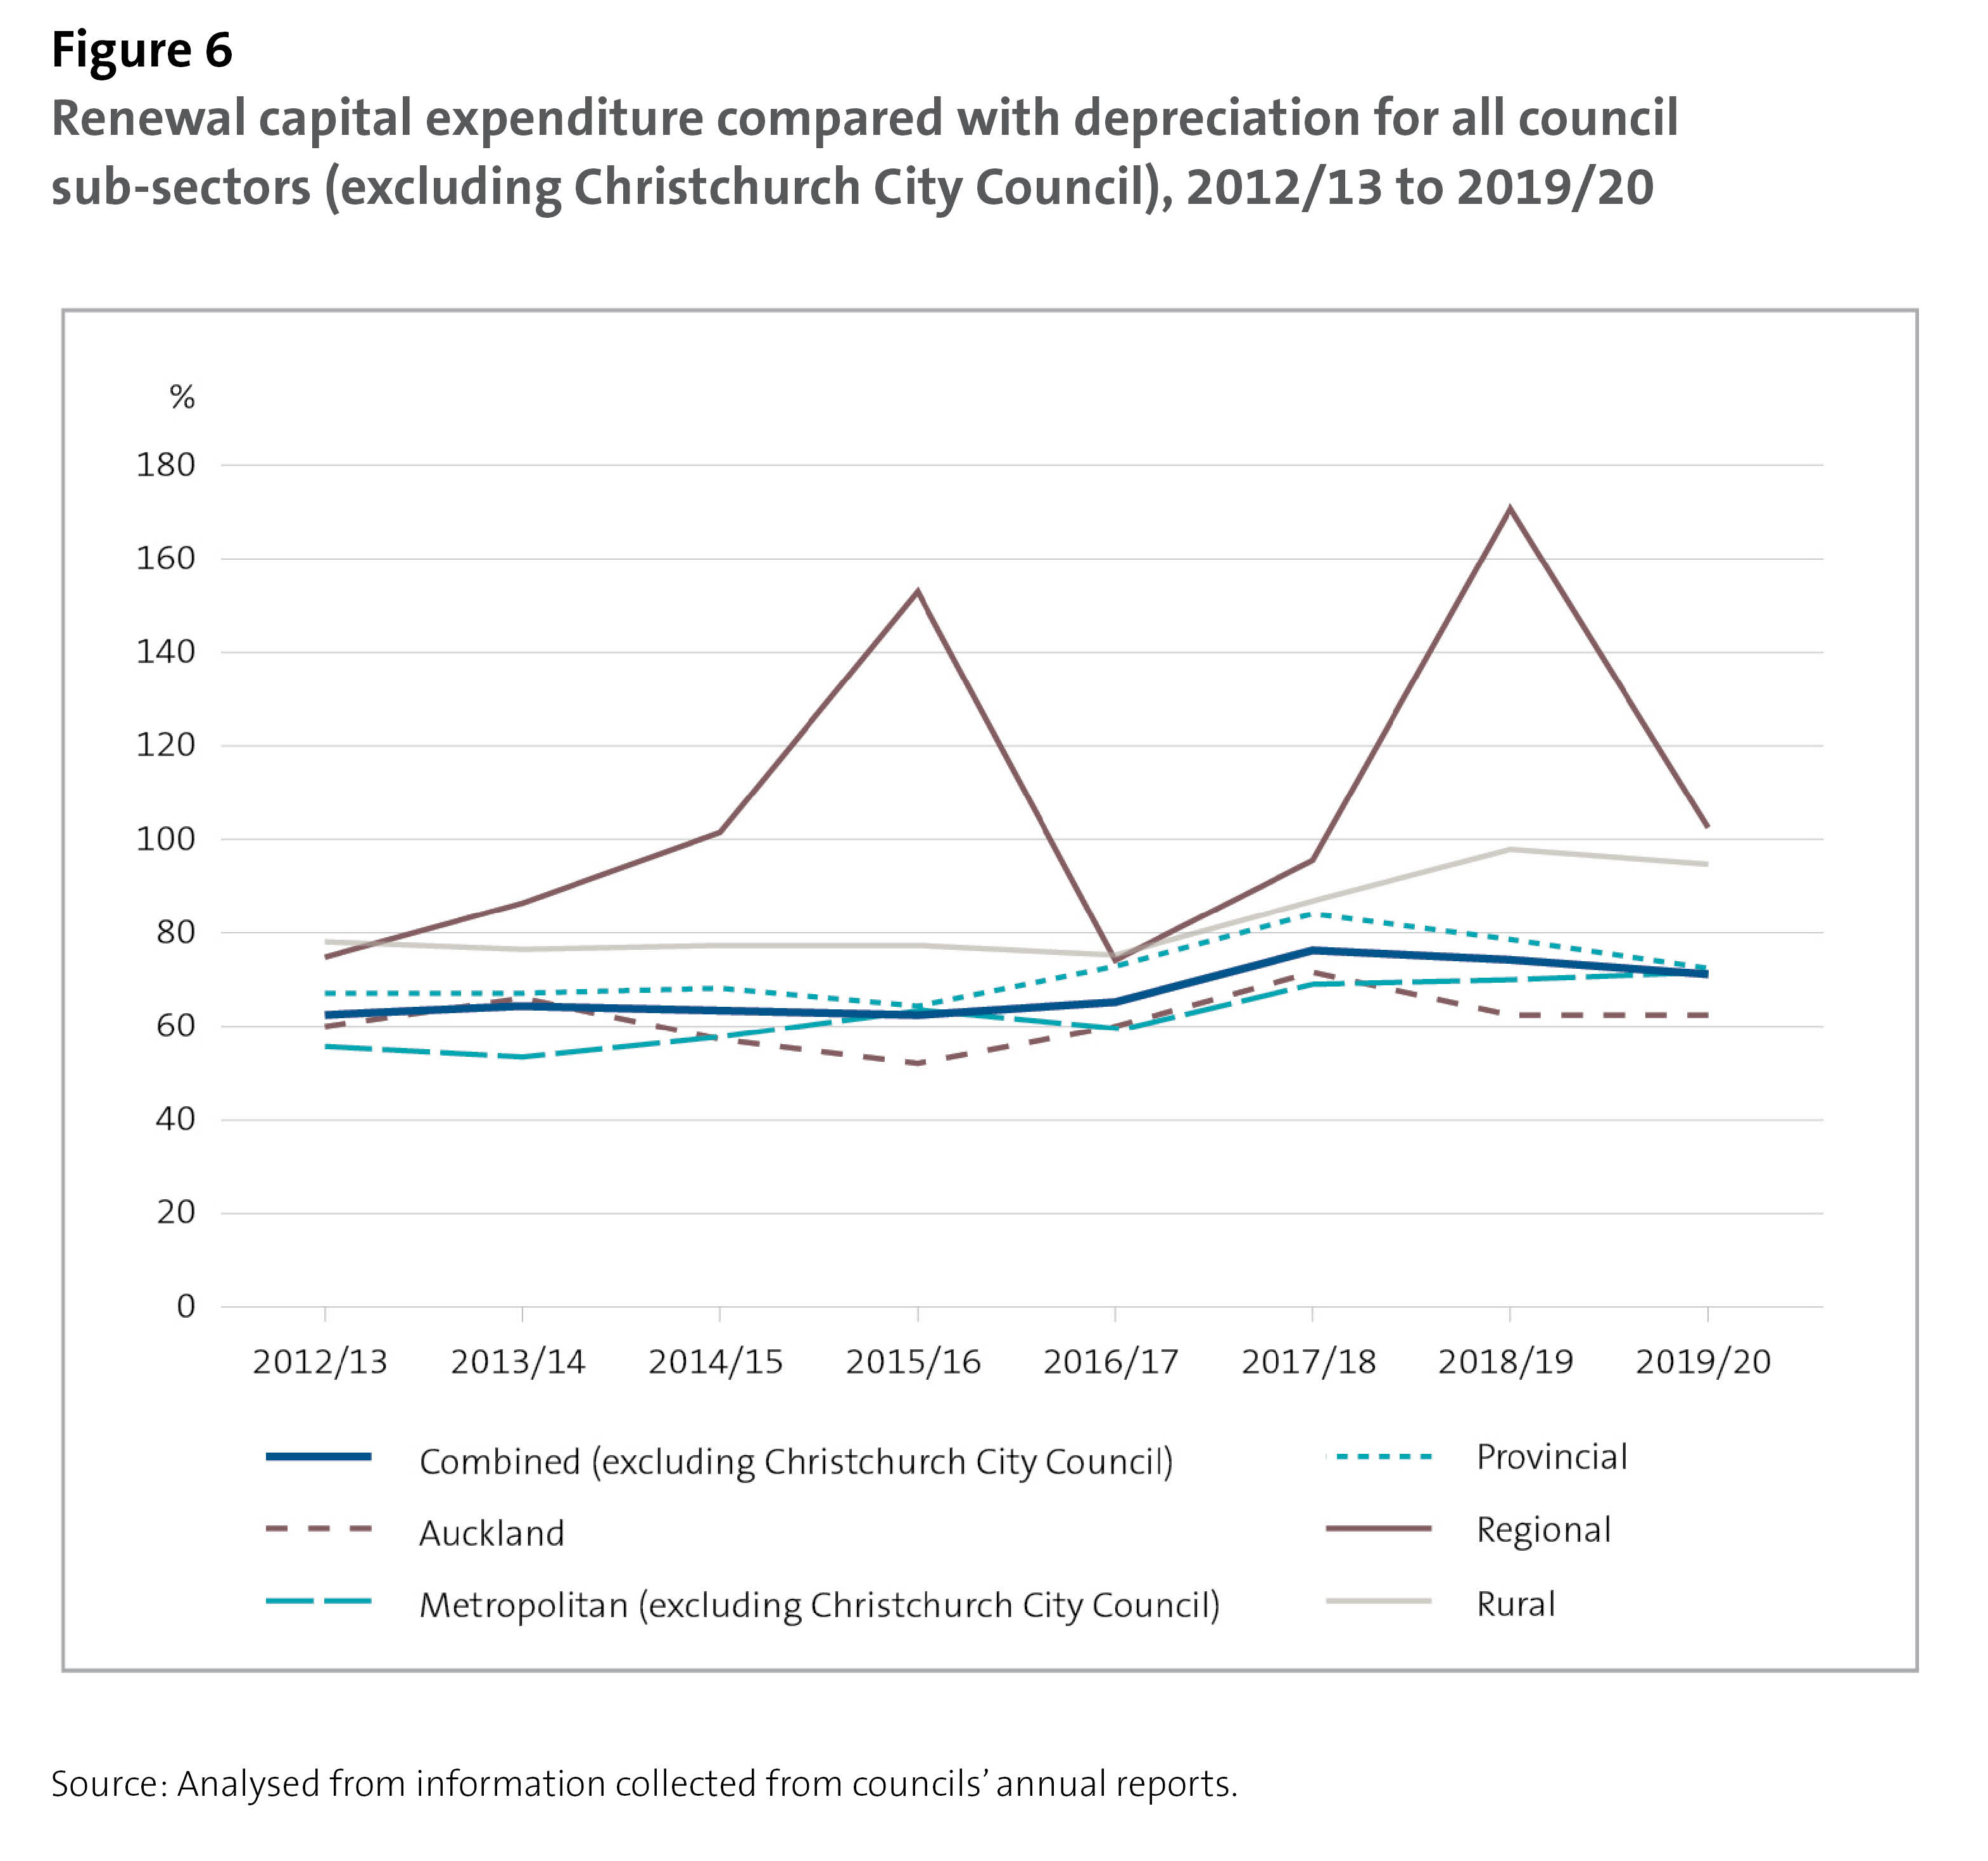 Figure 6 - Renewal capital expenditure compared with depreciation for all council sub-sectors (excluding Christchurch City Council), 2012/13 to 2019/20